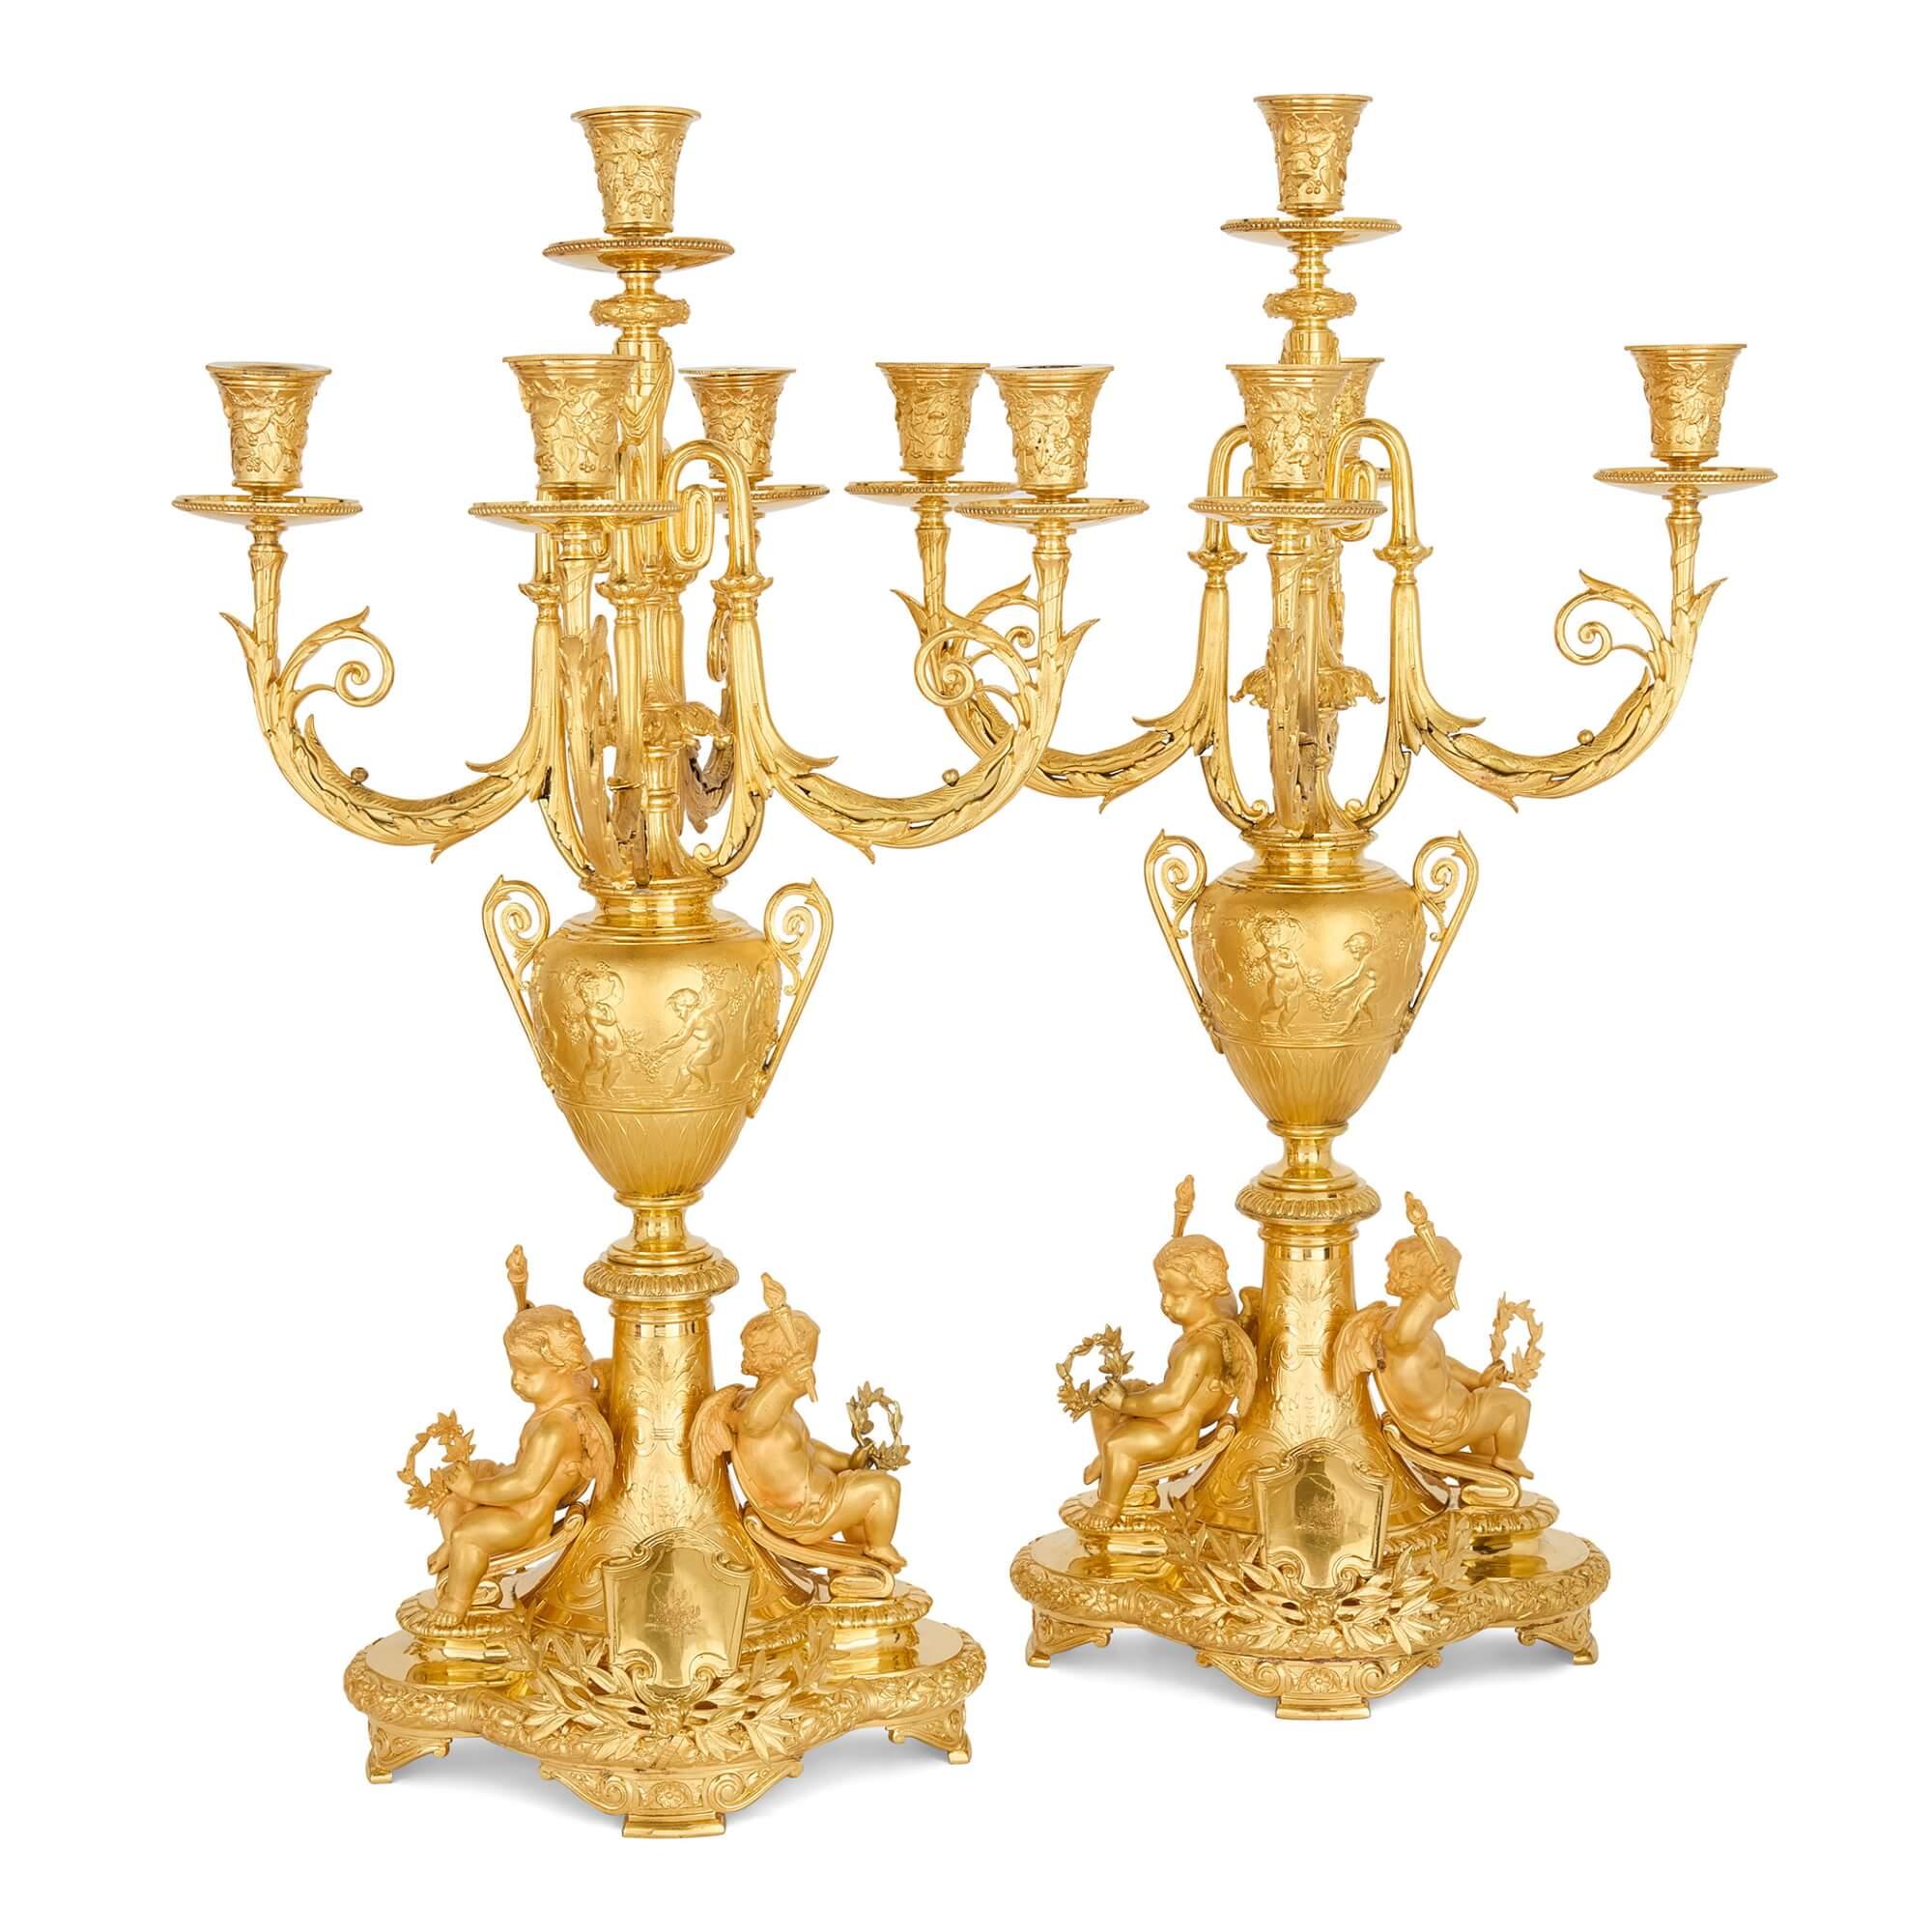 19th Century Gilt Metal Centrepiece Suite for the Duke of Sparta by Elkington & Co. For Sale